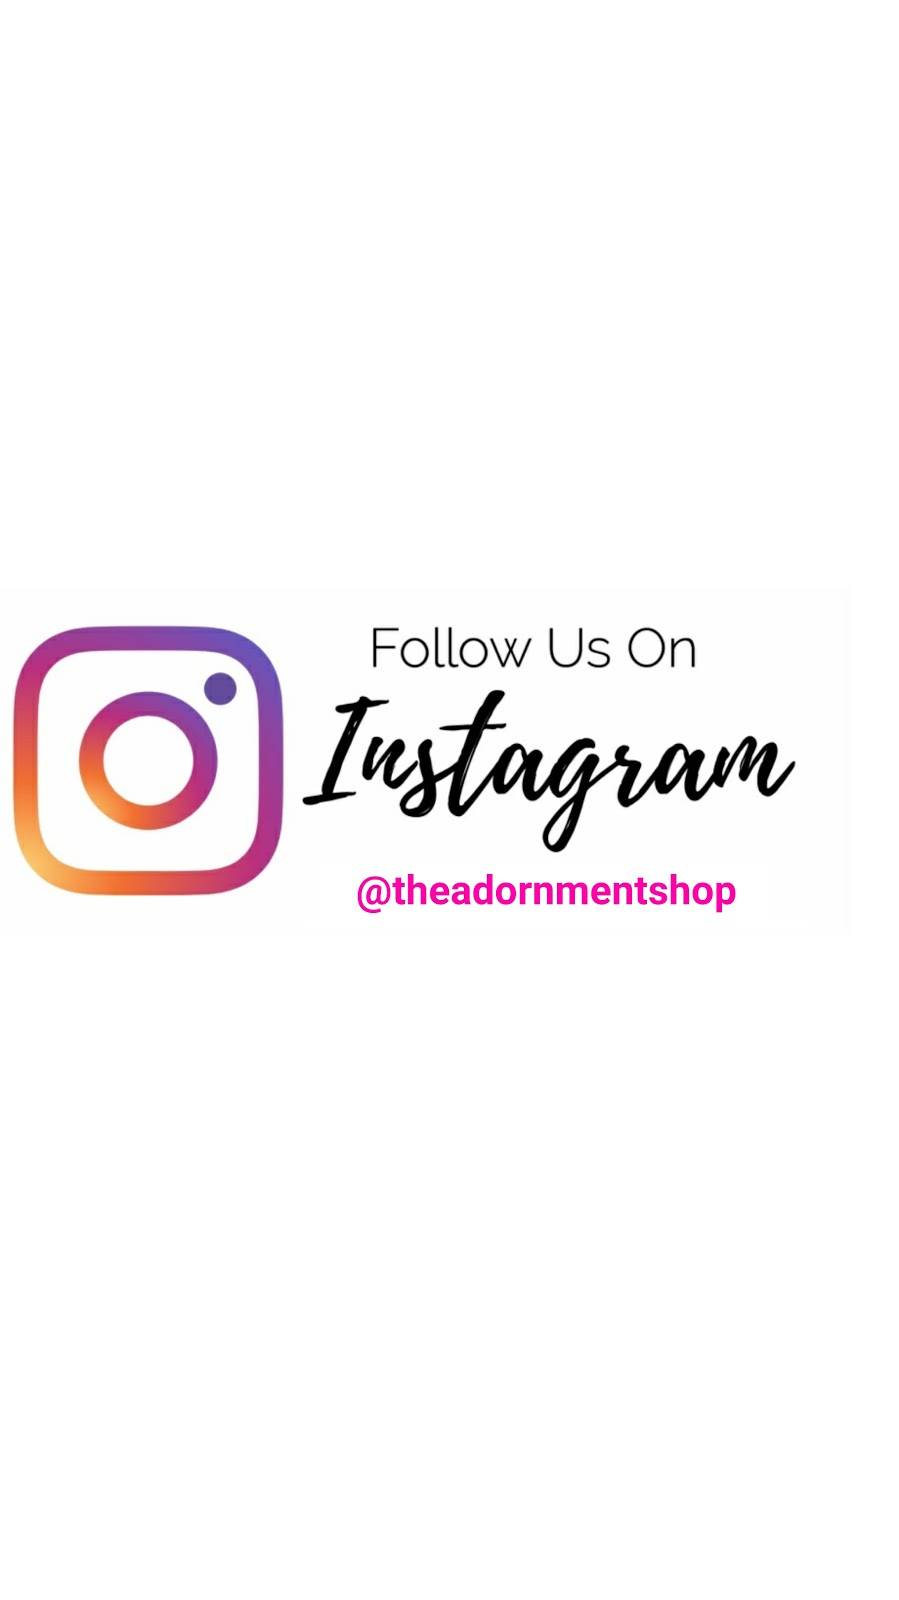 The Adornment Shop | 410 Four Seasons Blvd Inside The Cutting Edge Shoppes at Four Seasons SP226 Suite 402, Greensboro, NC 27407 | Phone: (336) 505-7170